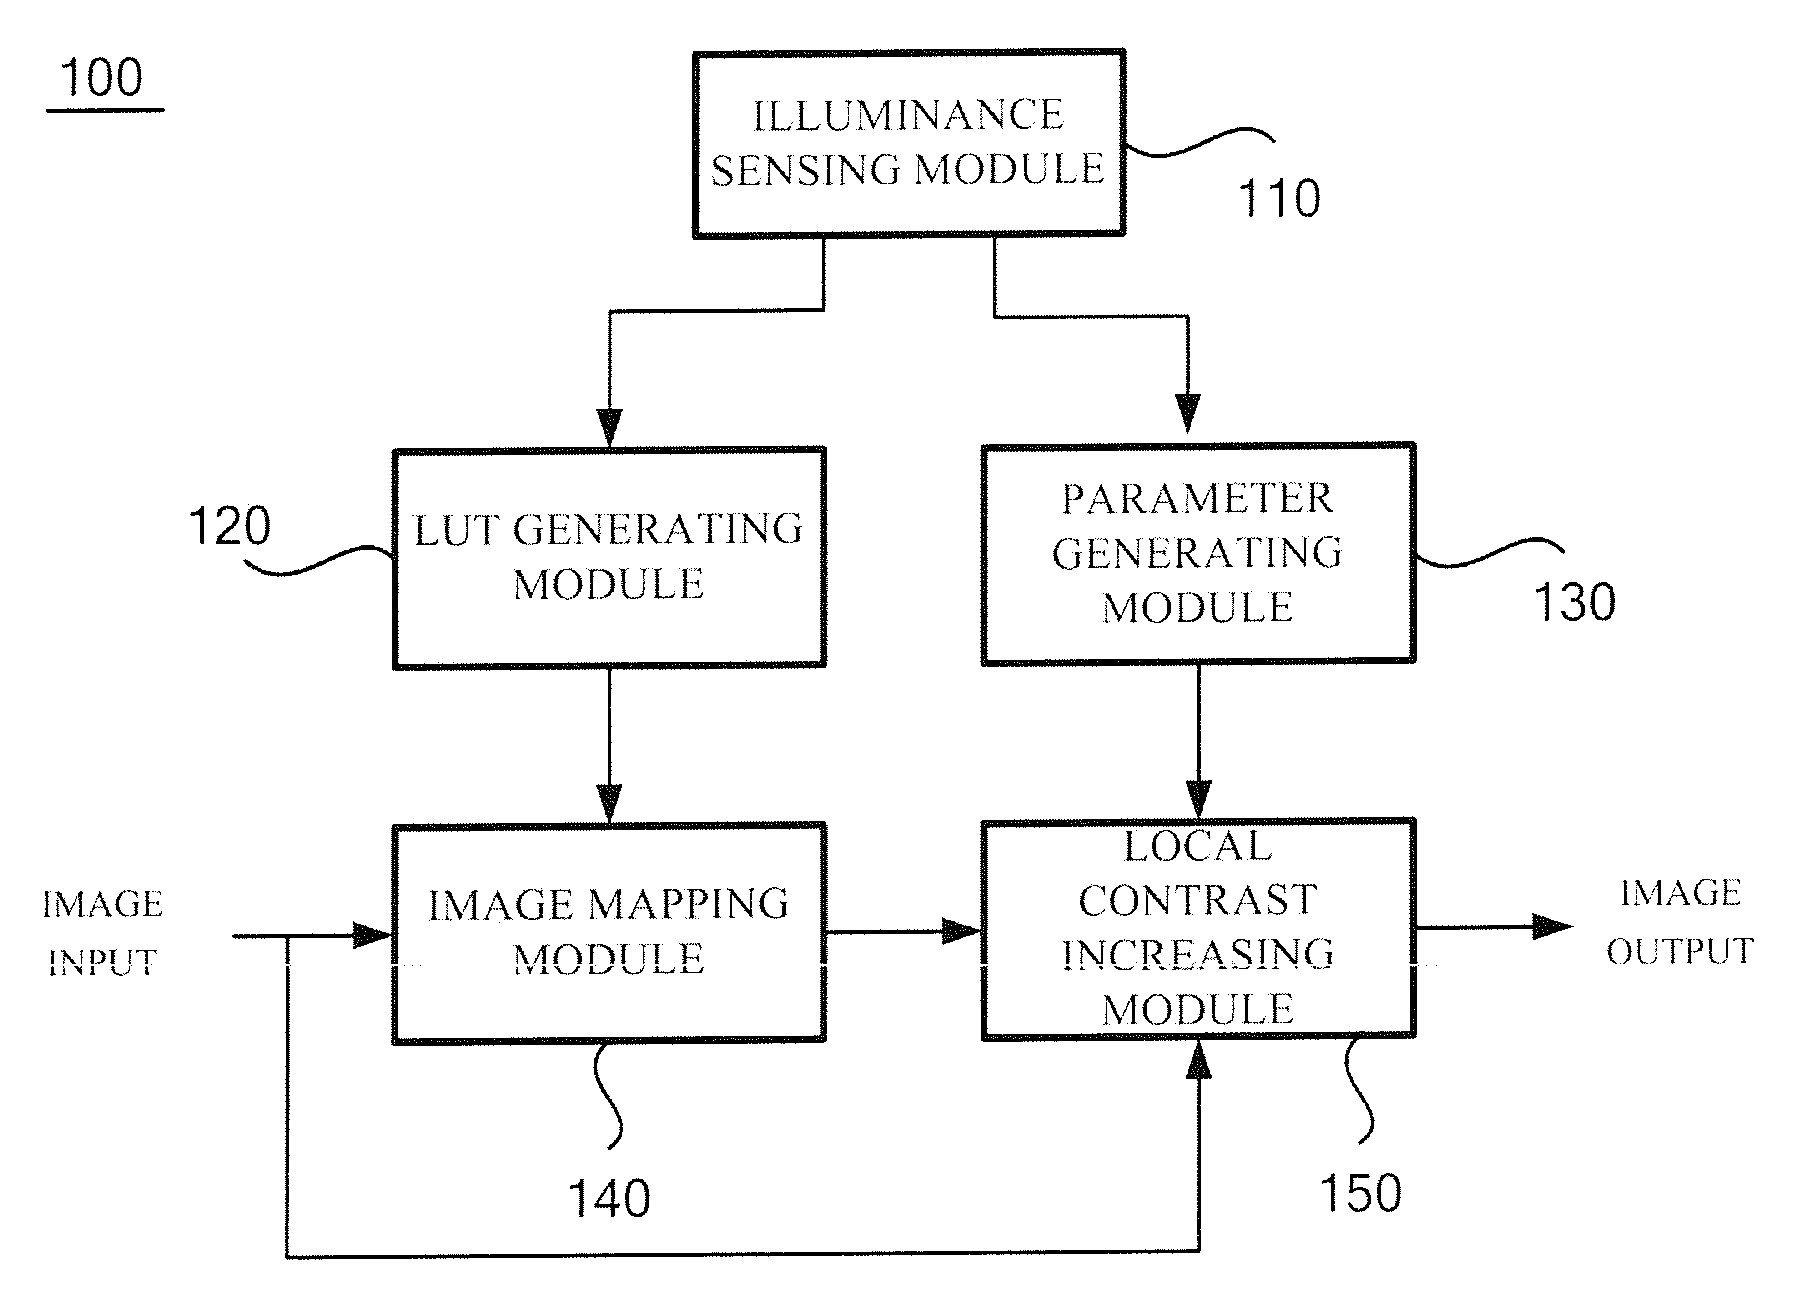 Apparatus and method for improving visibility of an image in a high illuminance environment